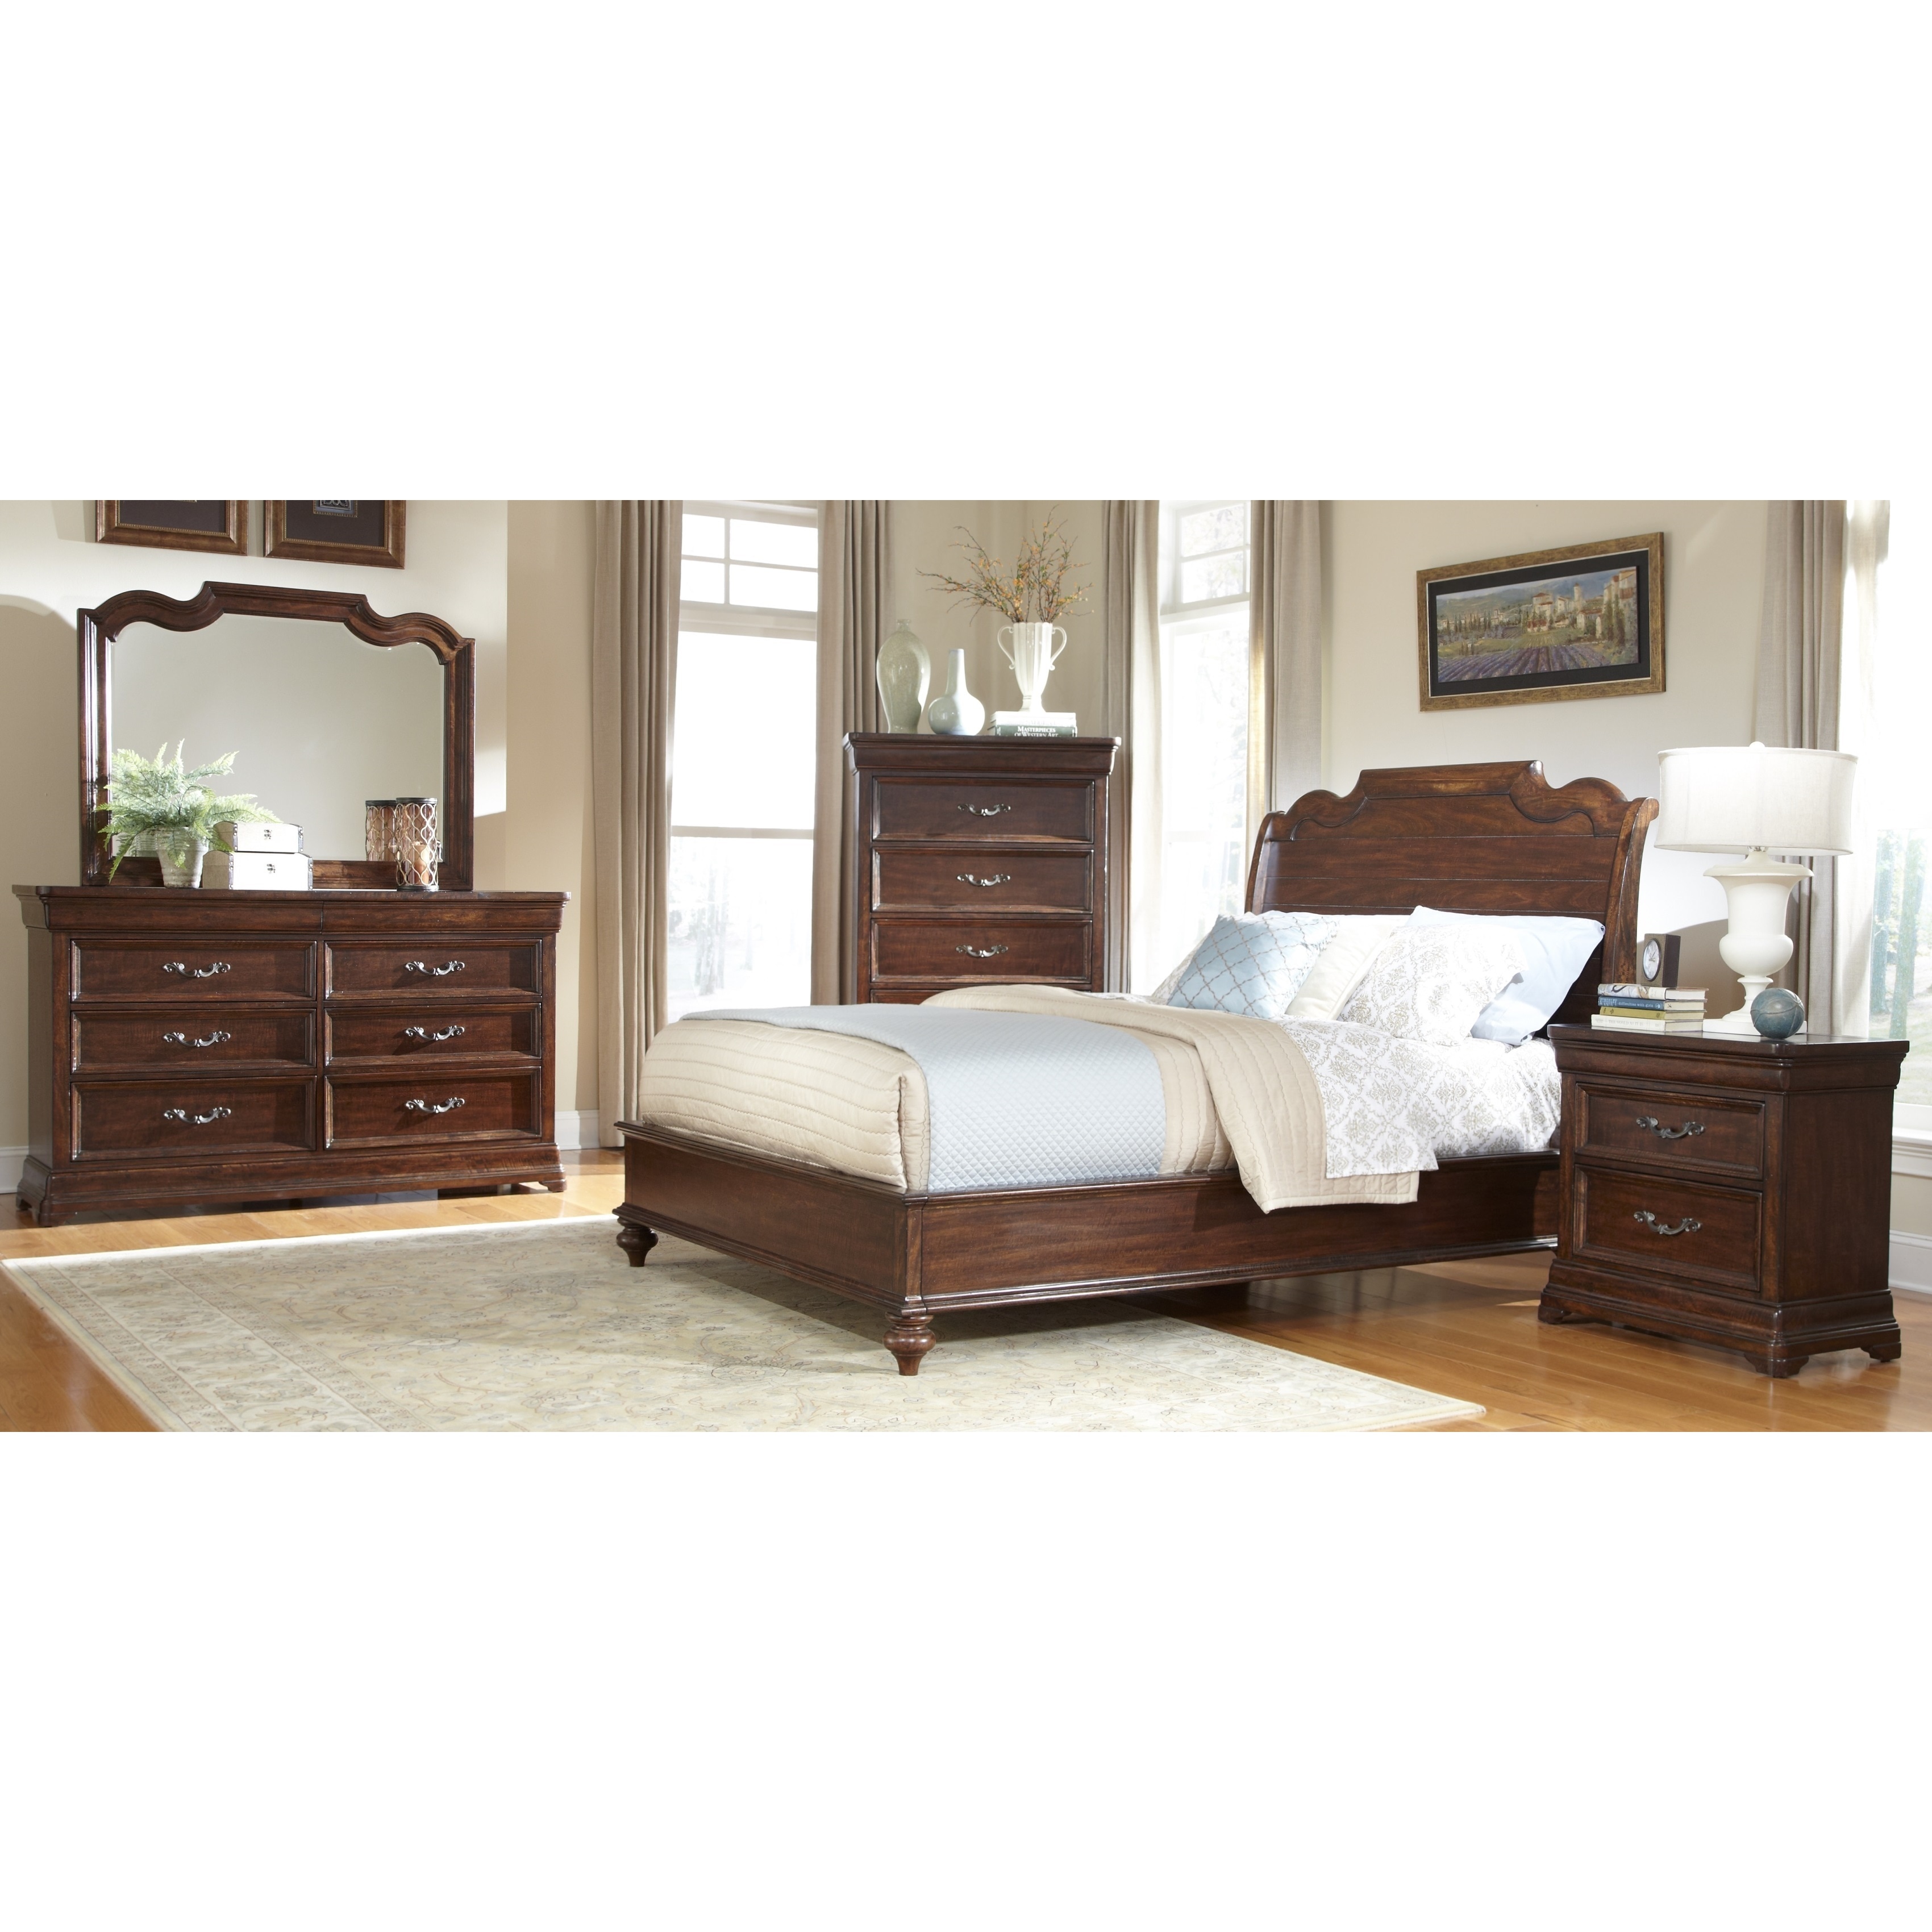 Sleigh 5 Piece Bedroom Set By Greyson Living Overstock 13329186